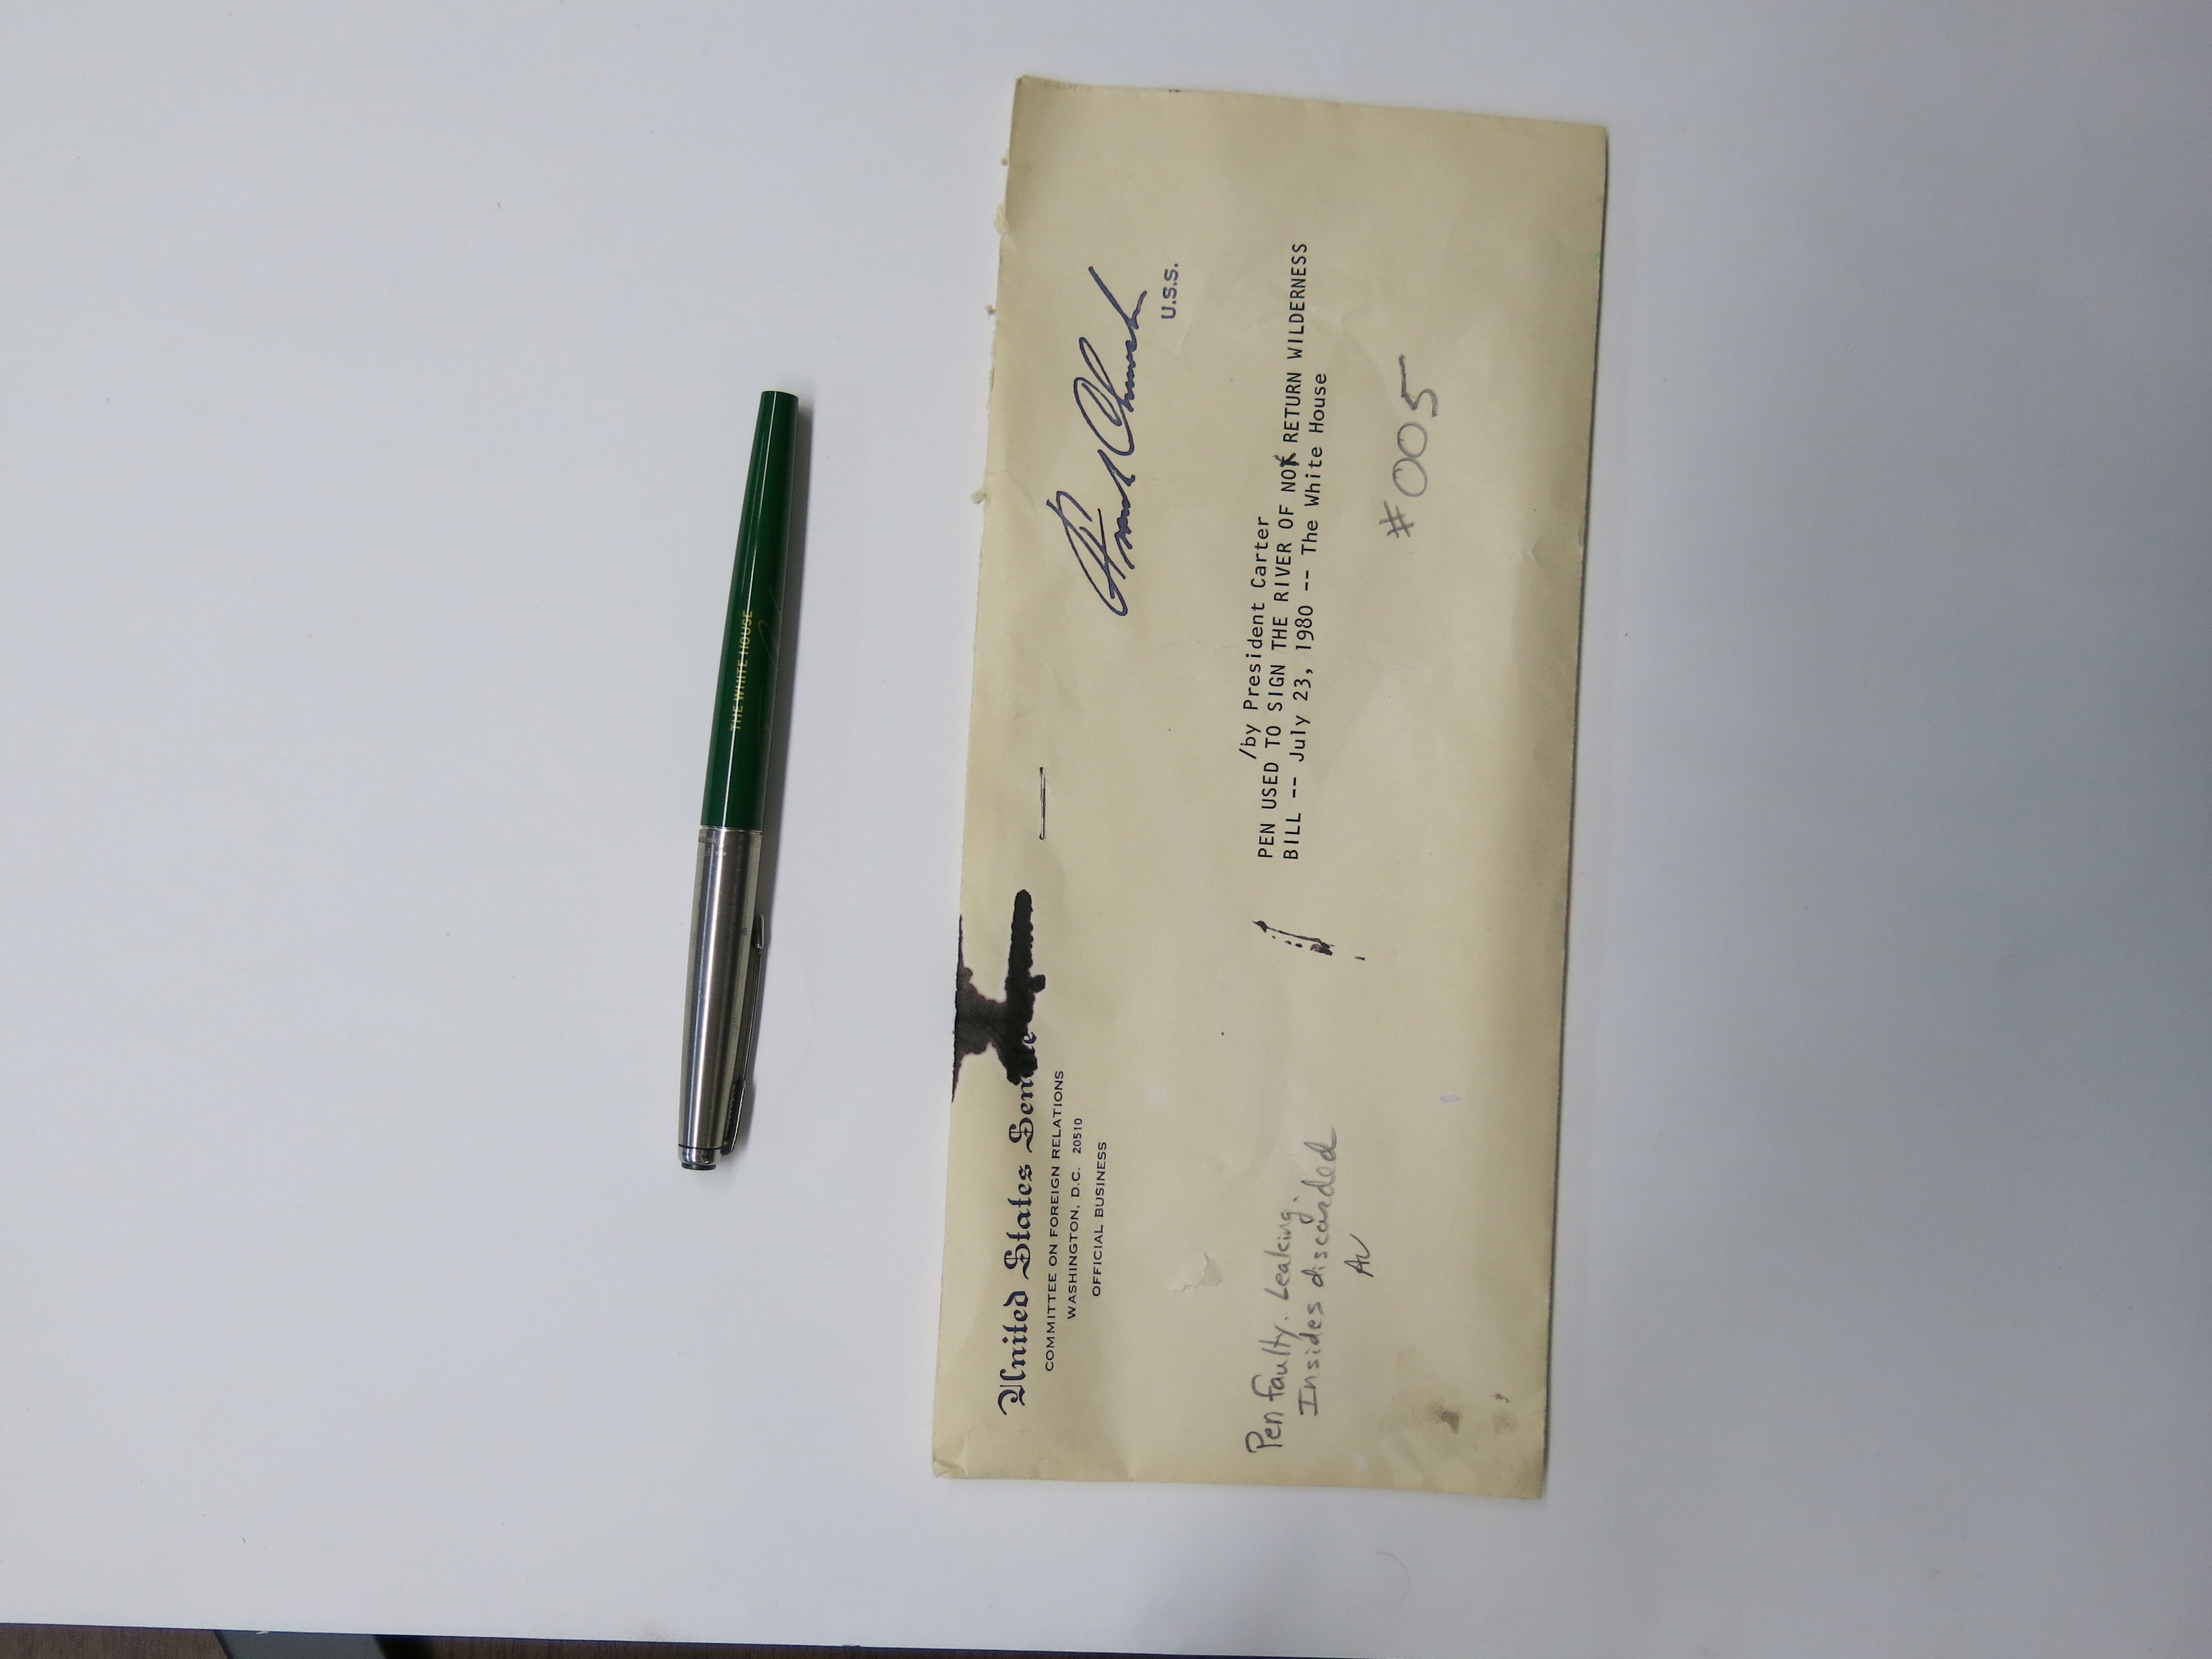 The pen used by Jimmy Carter to sign the Central Idaho Wilderness Act in 1980.